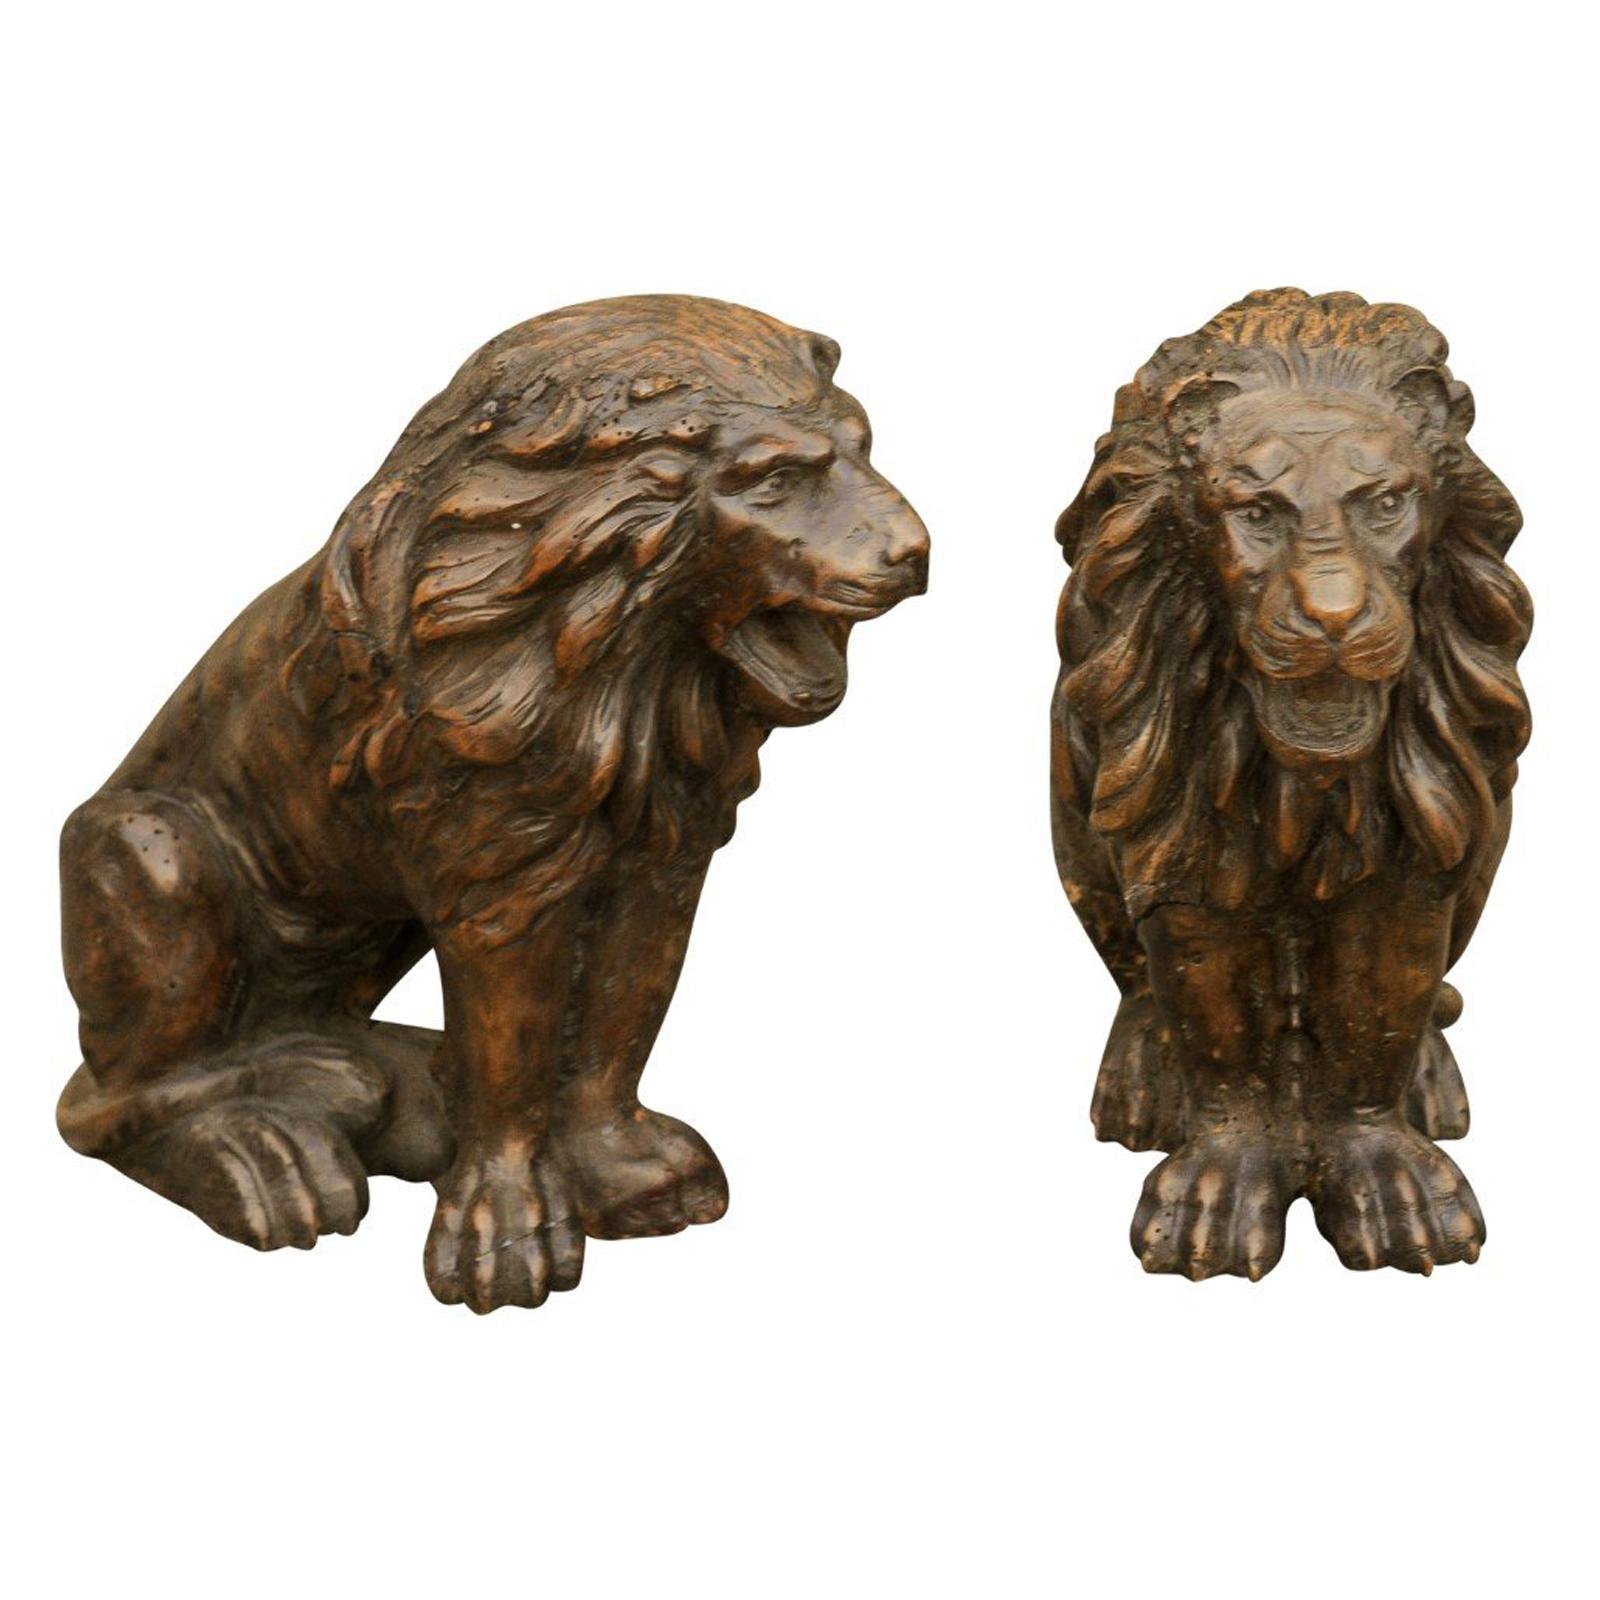 Pair of Italian 1880s Small Walnut Hand Carved Lion Sculptures with Dark Patina